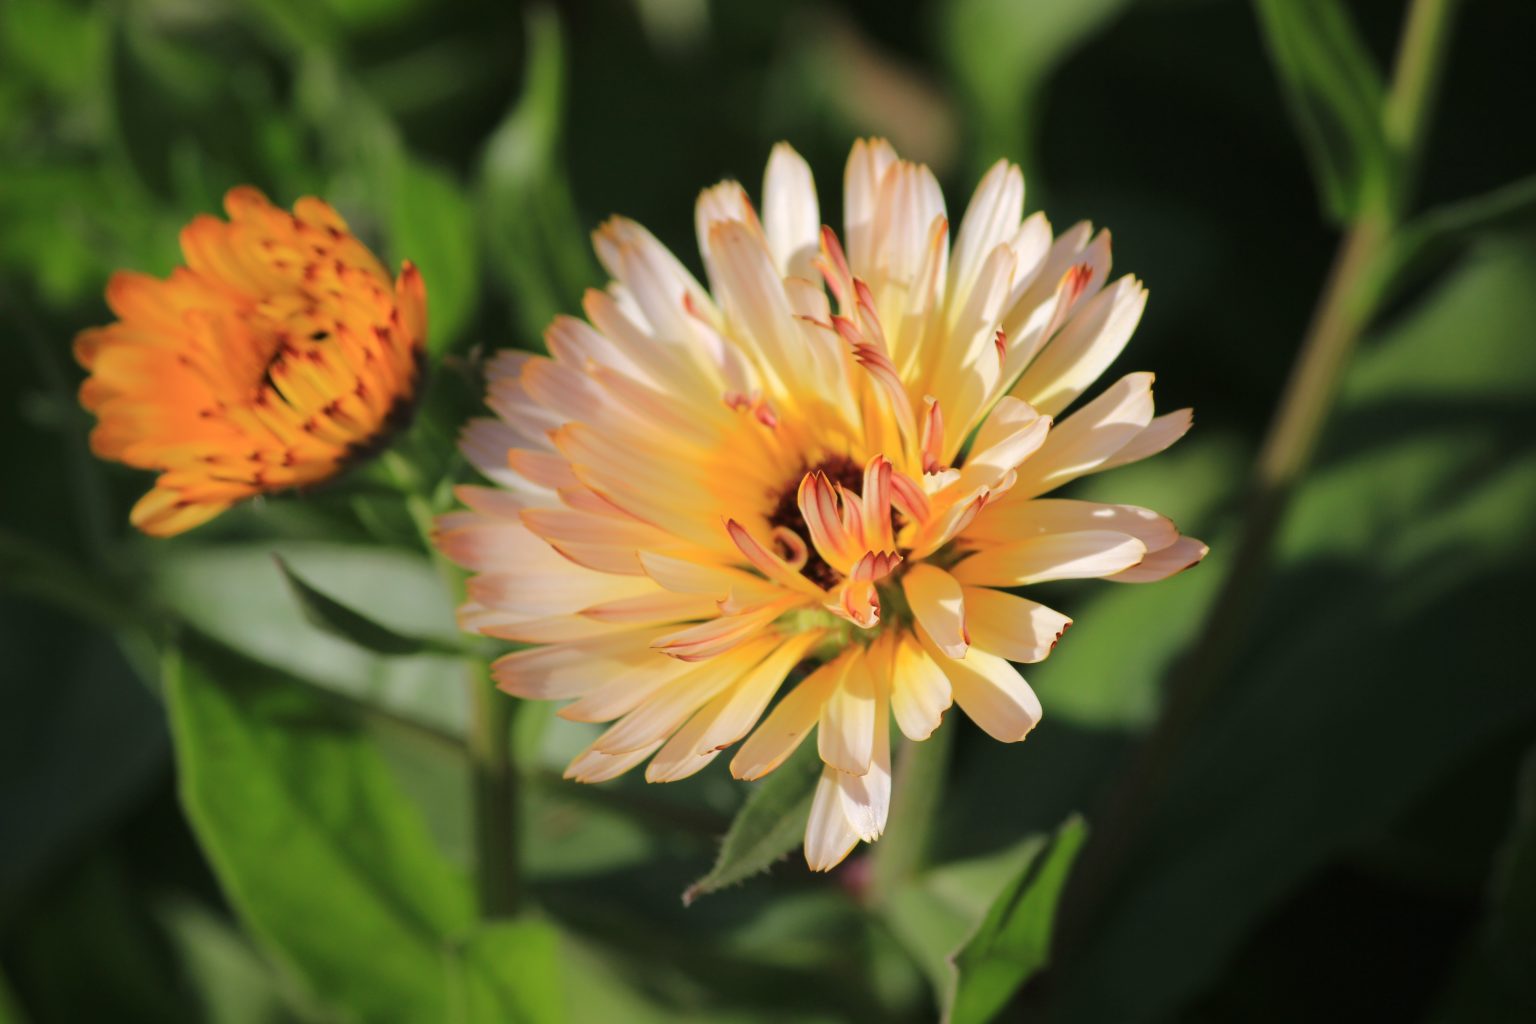 Close-up of orange and yellow ice plant flowers.